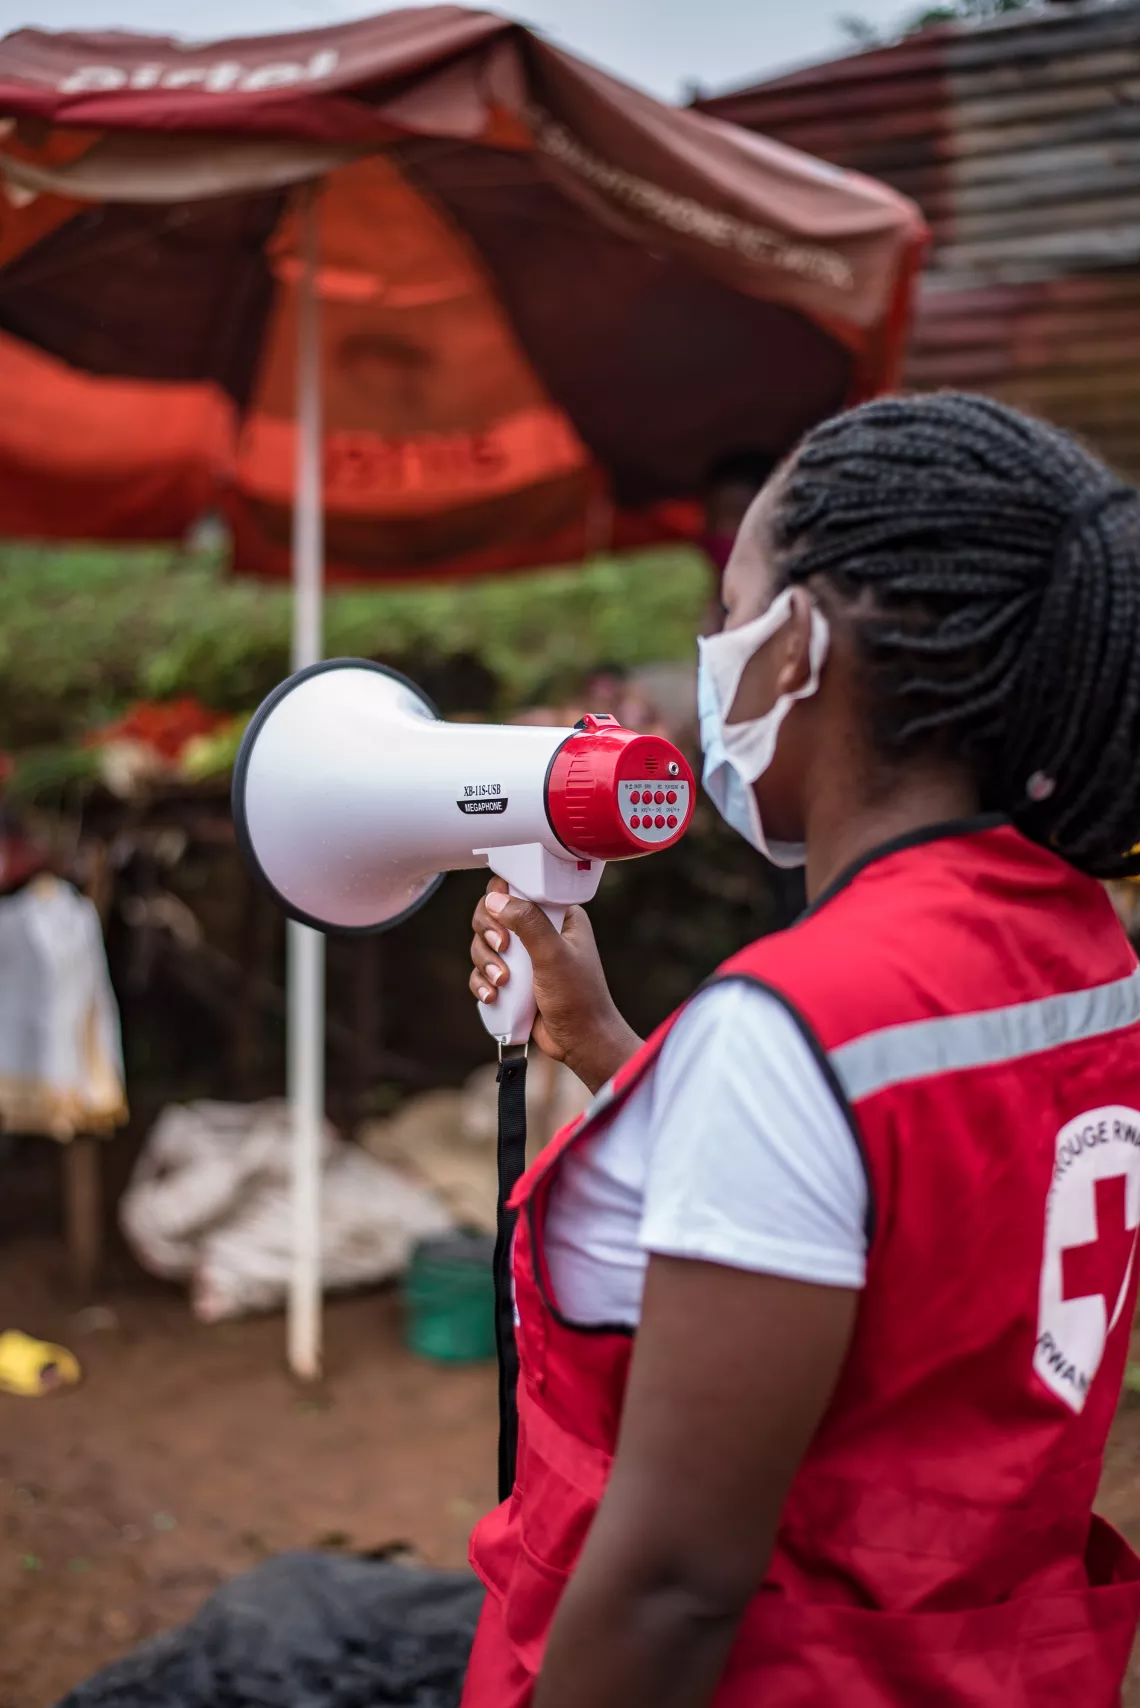 Justine, a Red Cross volunteer, informs people in the Gatsata community through her megaphone on how to effectively practice COVID measure.